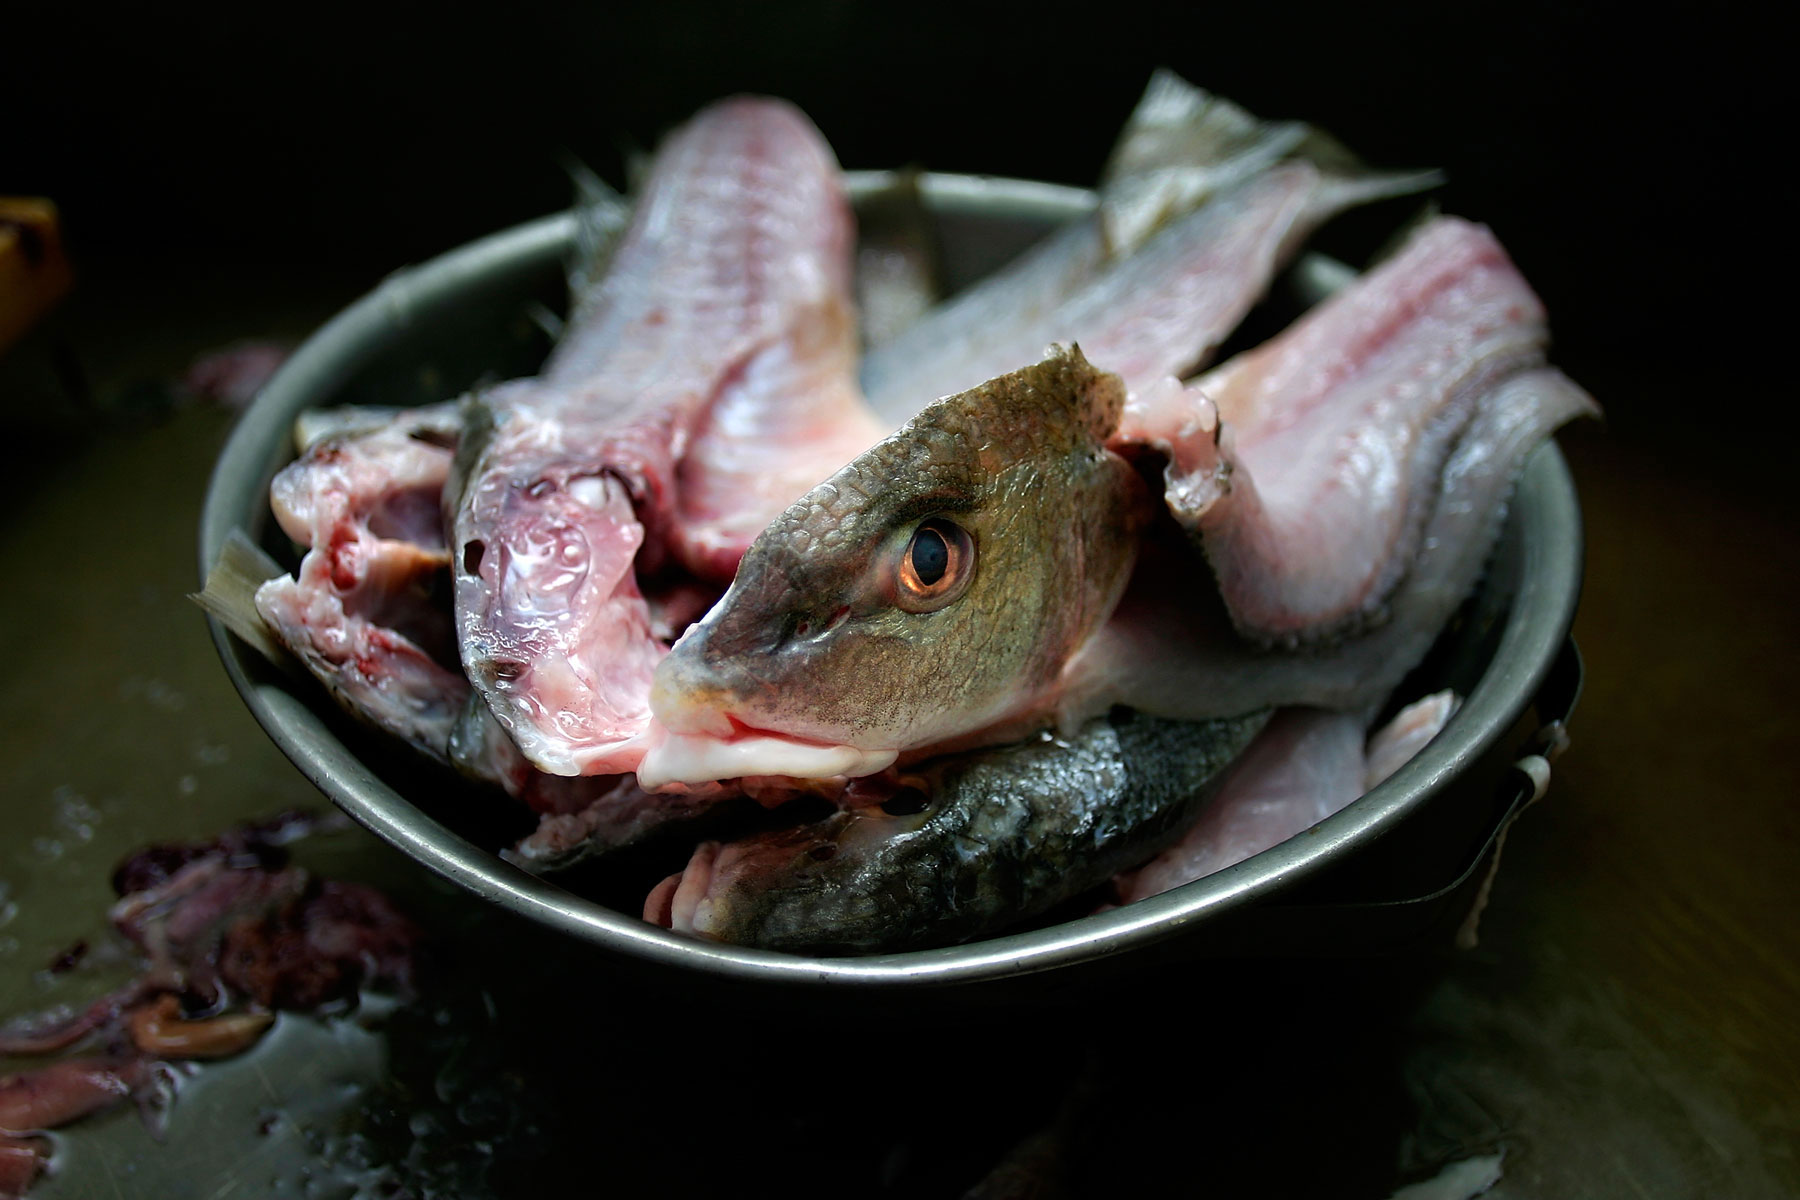 A bowl full of gutted fish, one of whose eyes glares at the camera